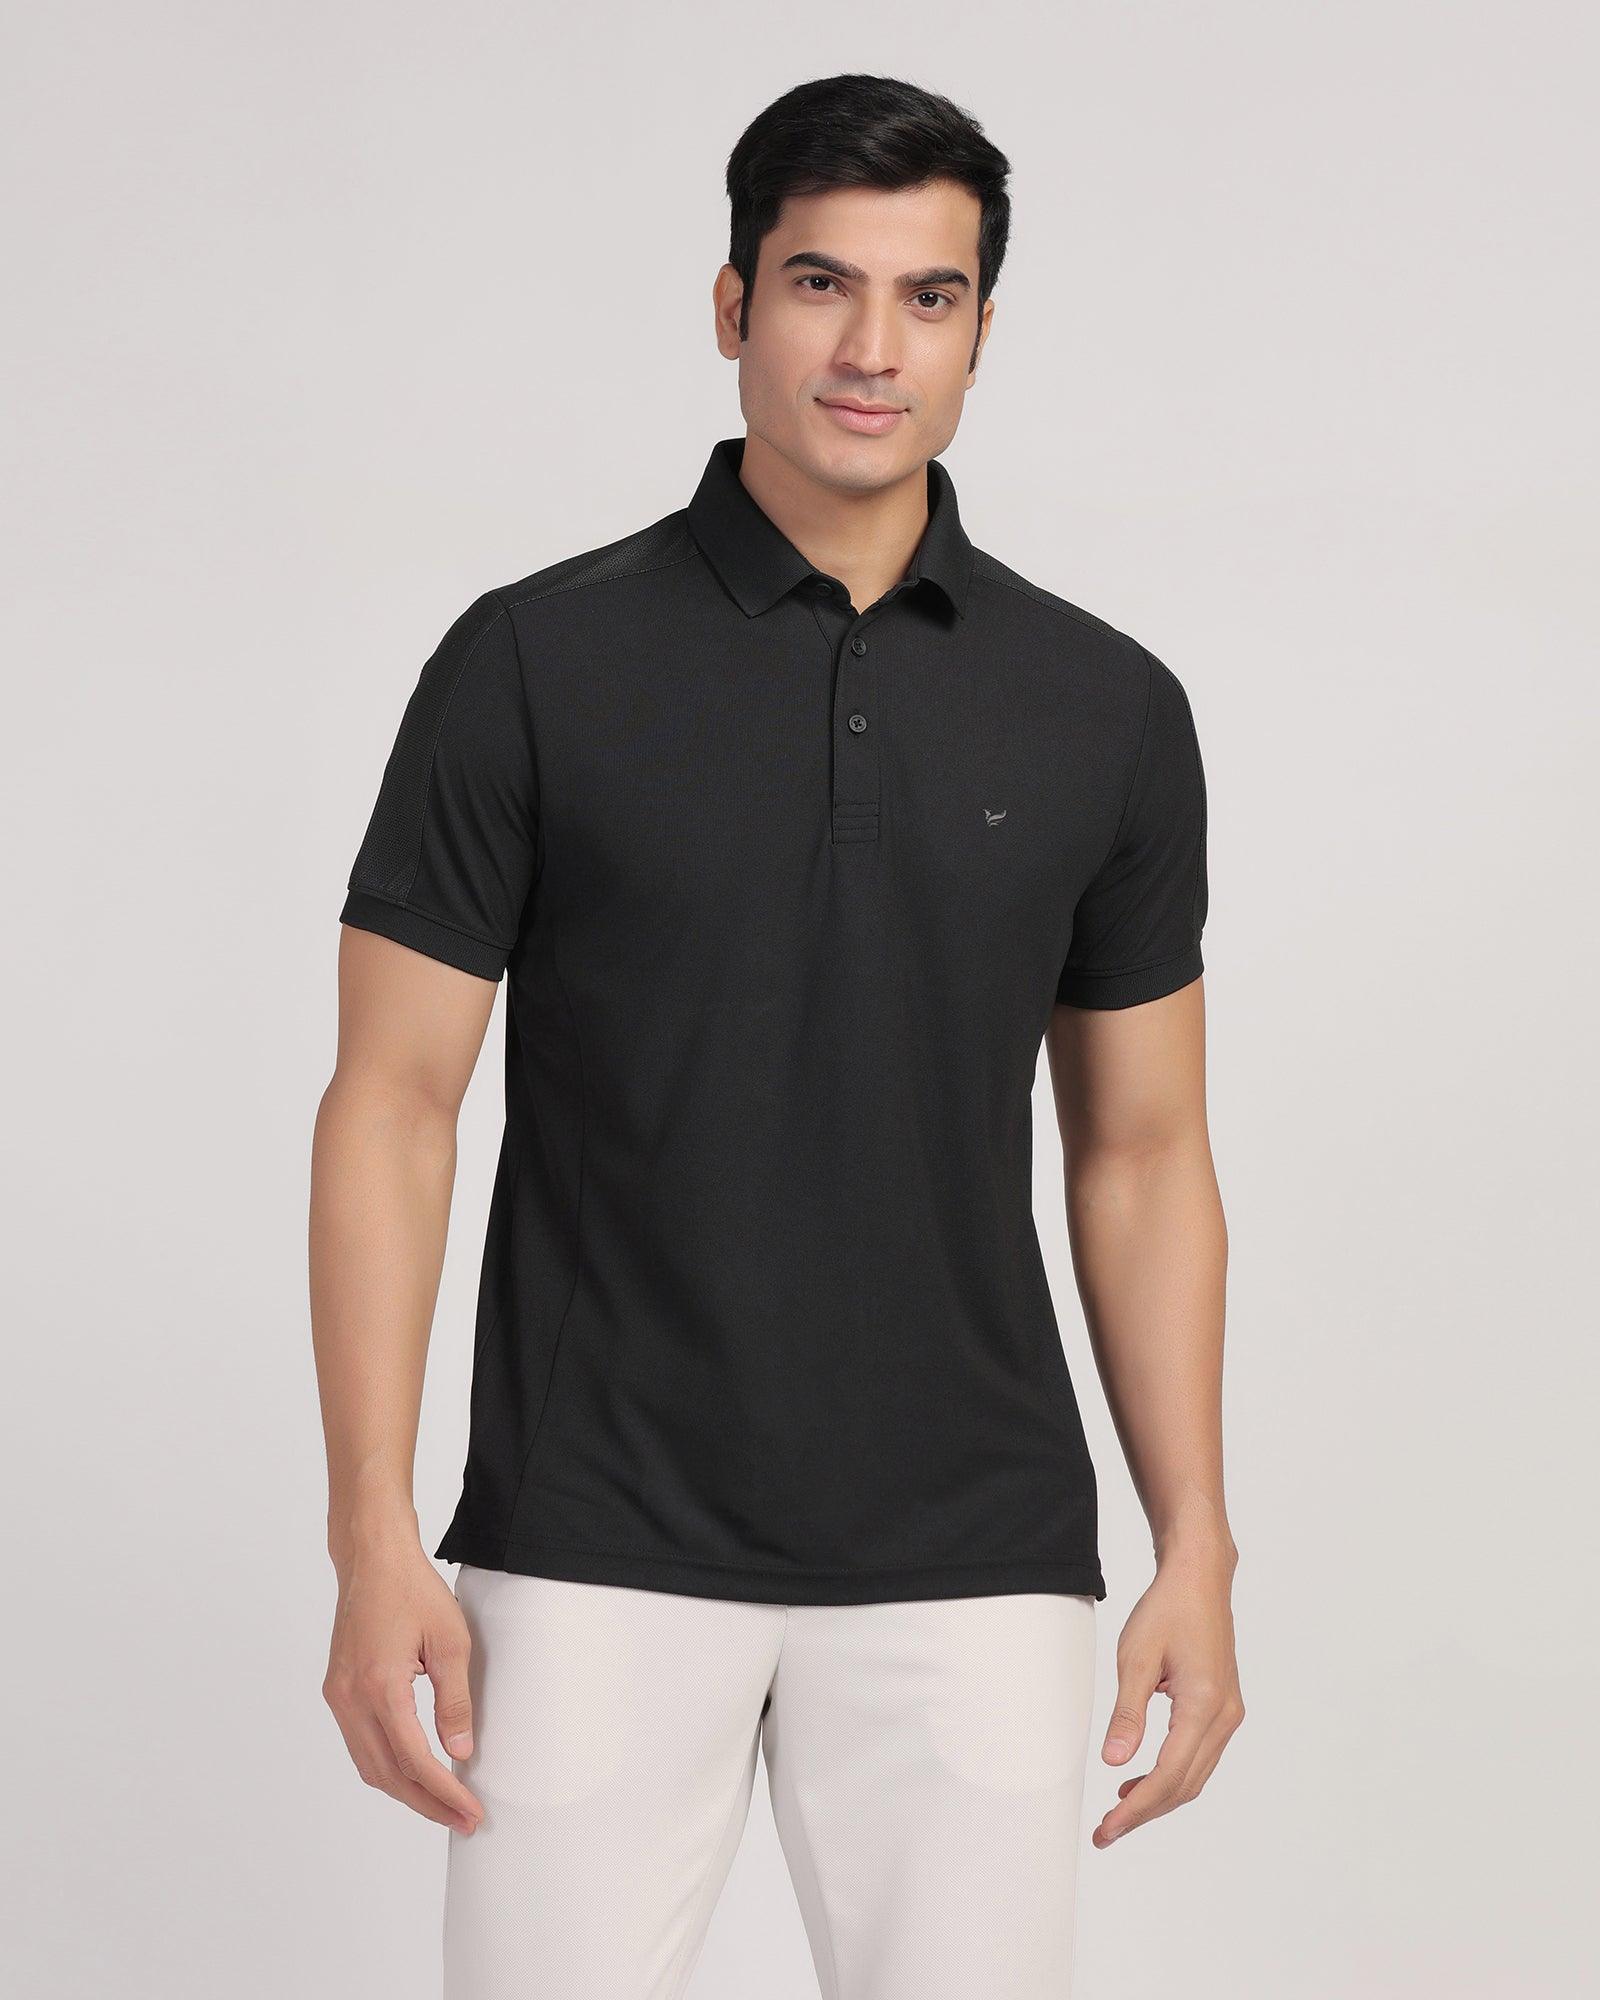 TechPro Polo Black Solid T-Shirt - Lewis